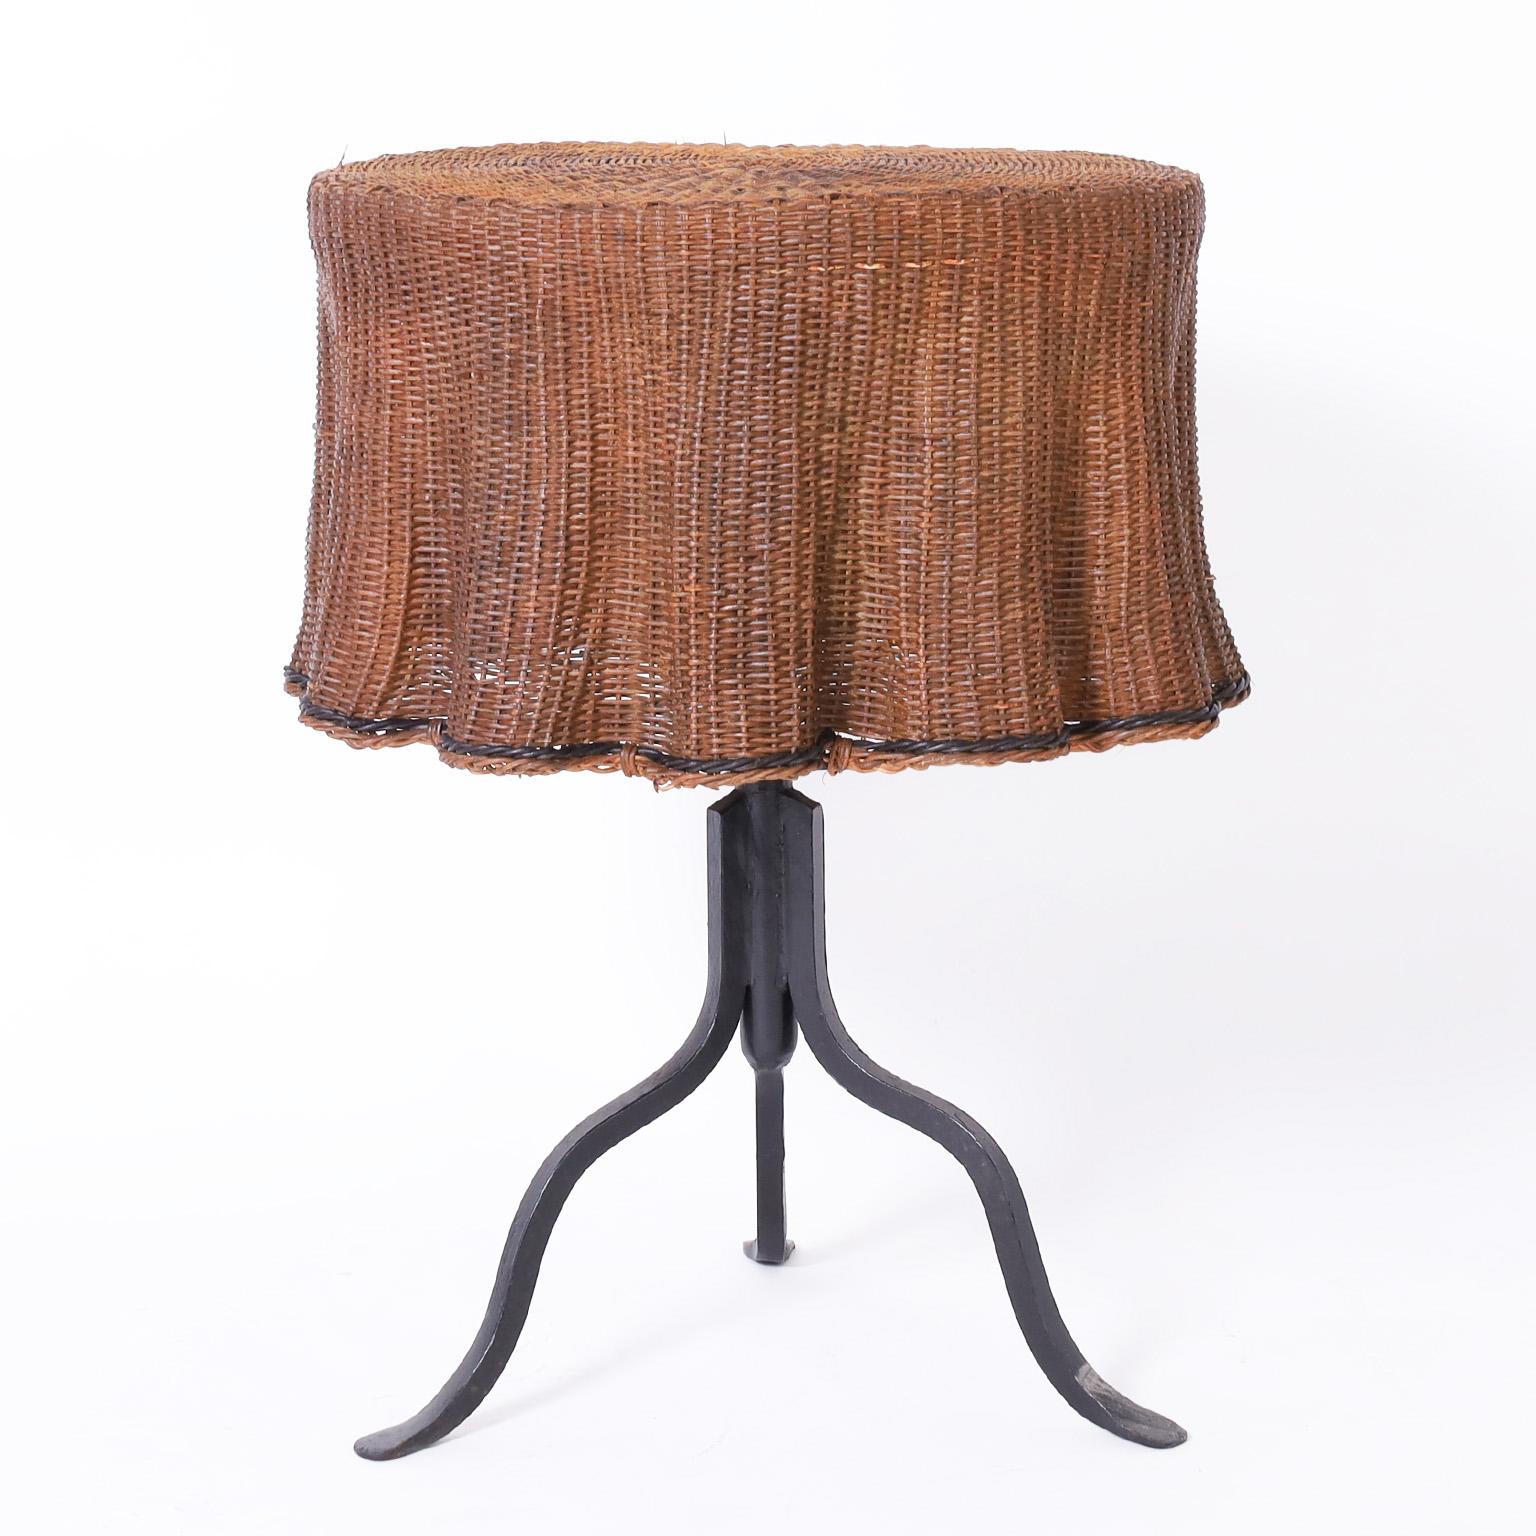 Unusual vintage occasional table with a ghost drapery top crafted in wicker on an iron base having three cabriole legs.